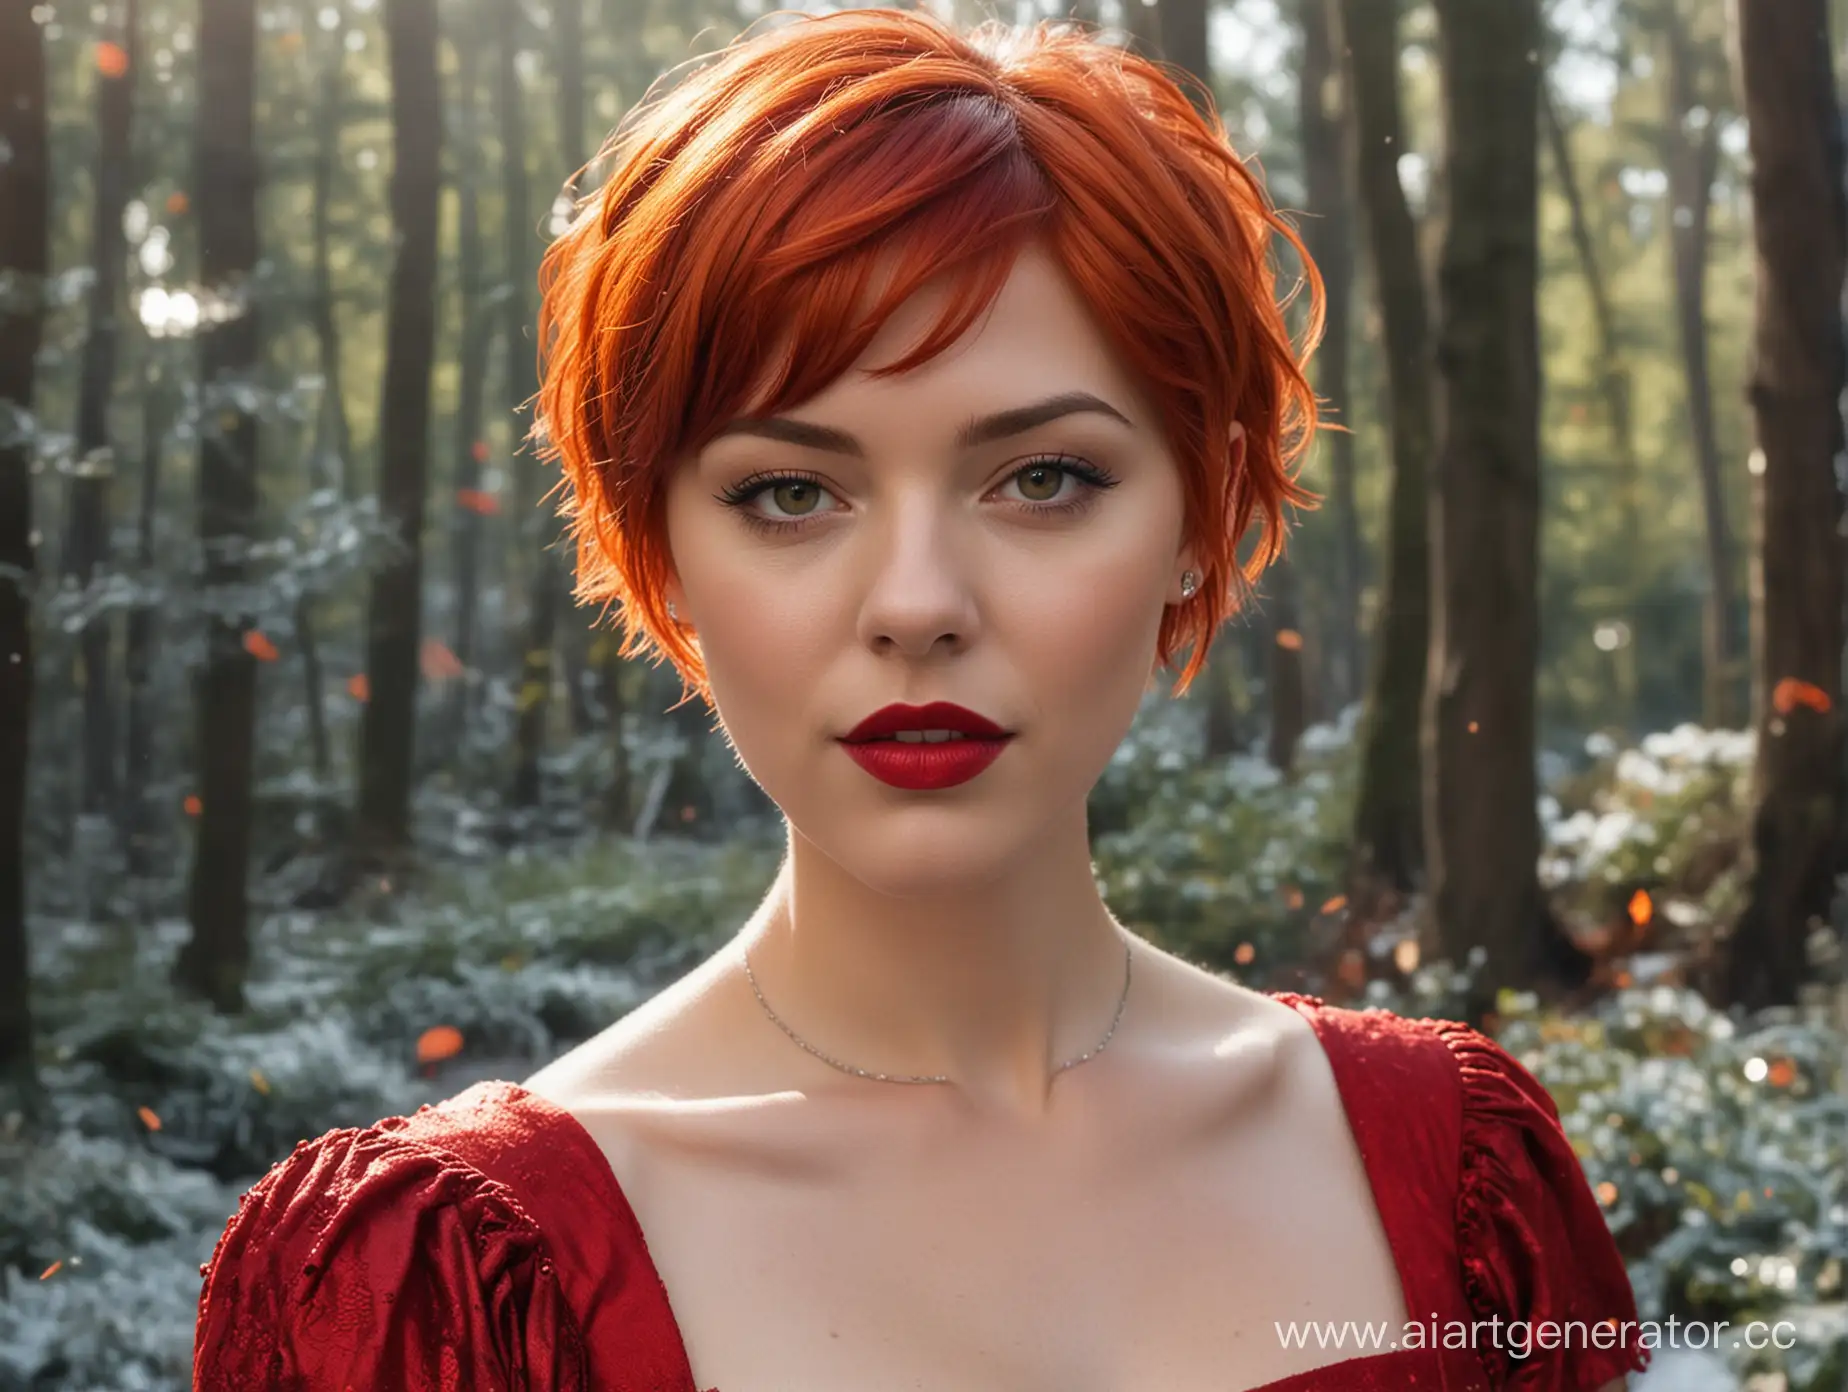 RedHaired-Pixie-Girl-in-Contemporary-Tudor-Attire-amidst-Ice-Flames-and-Greenery